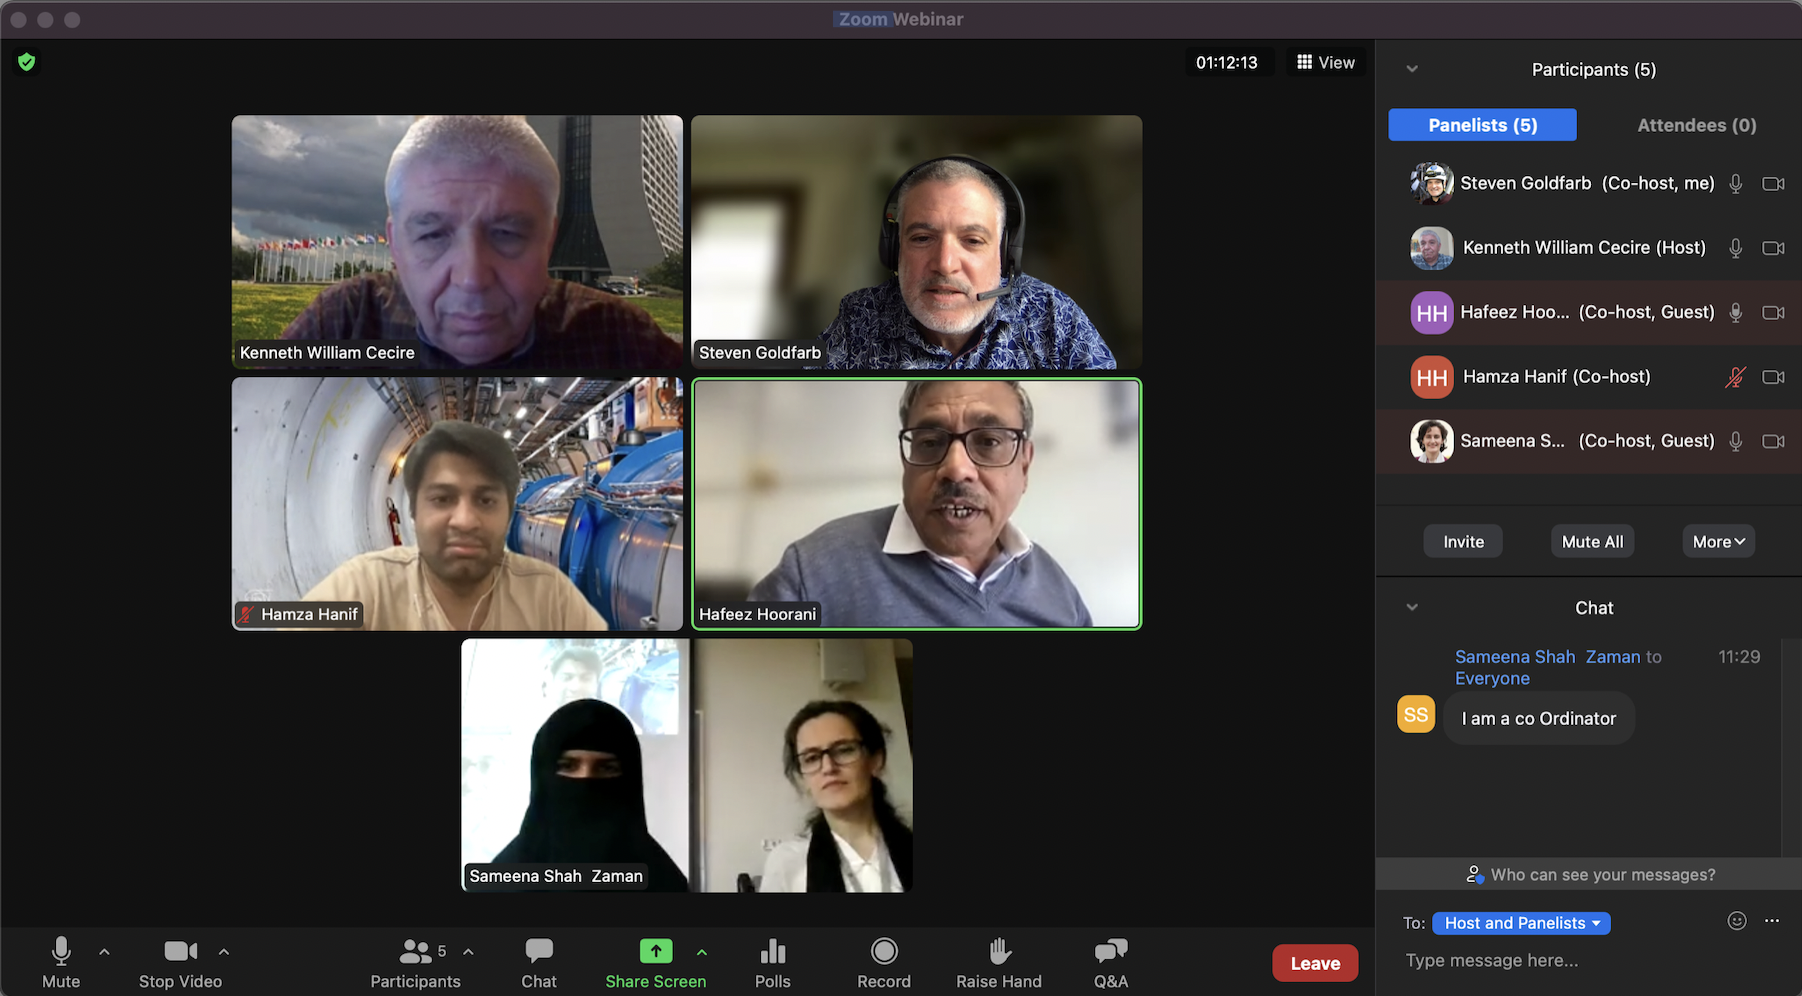 Captured screen of the first session on March 28th, Karachi, at the time of the video-conference